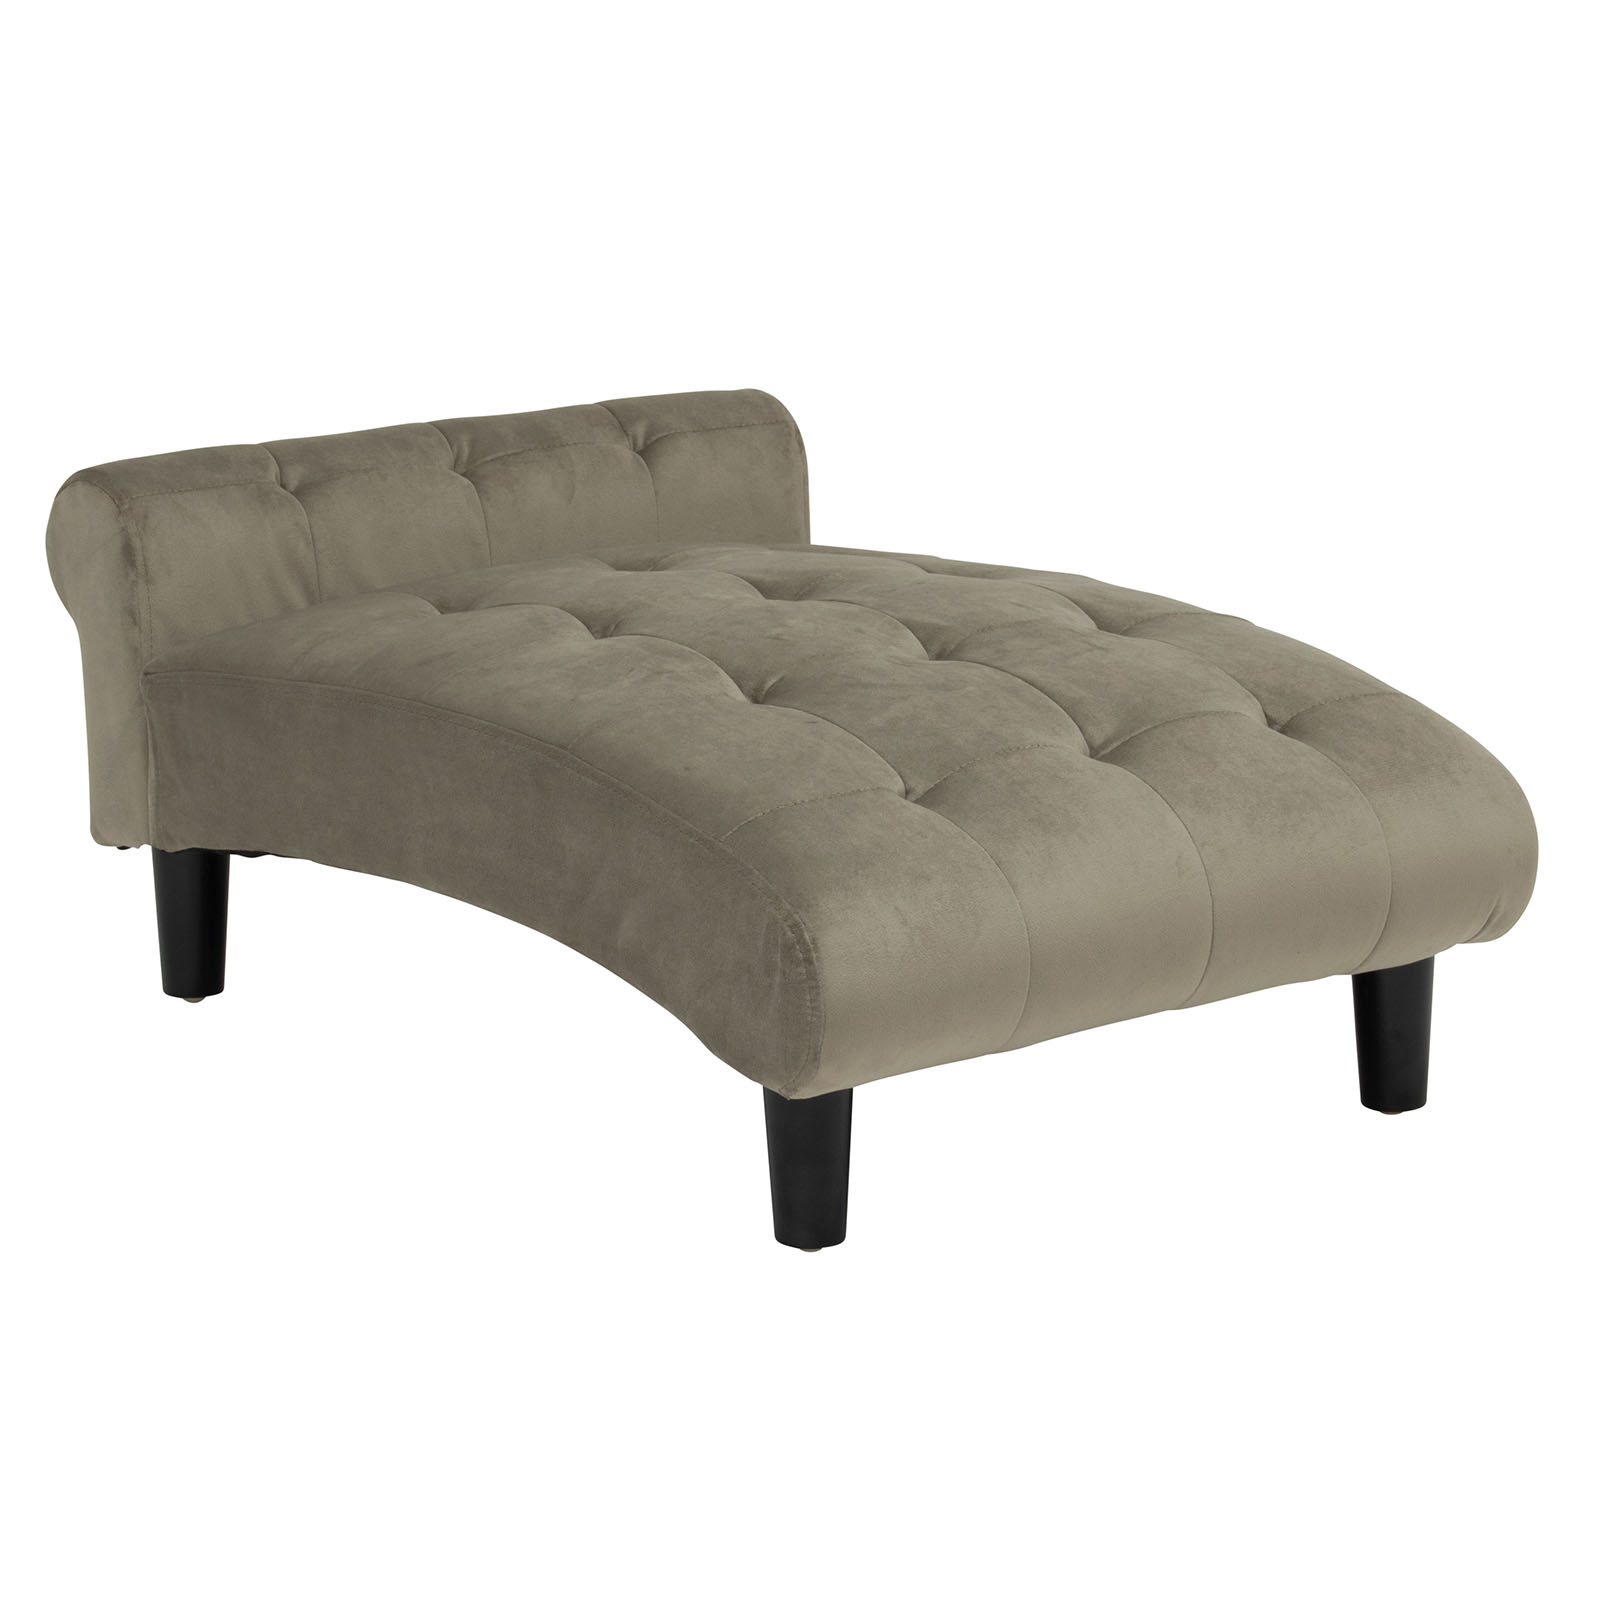 61201 Pet Chaise